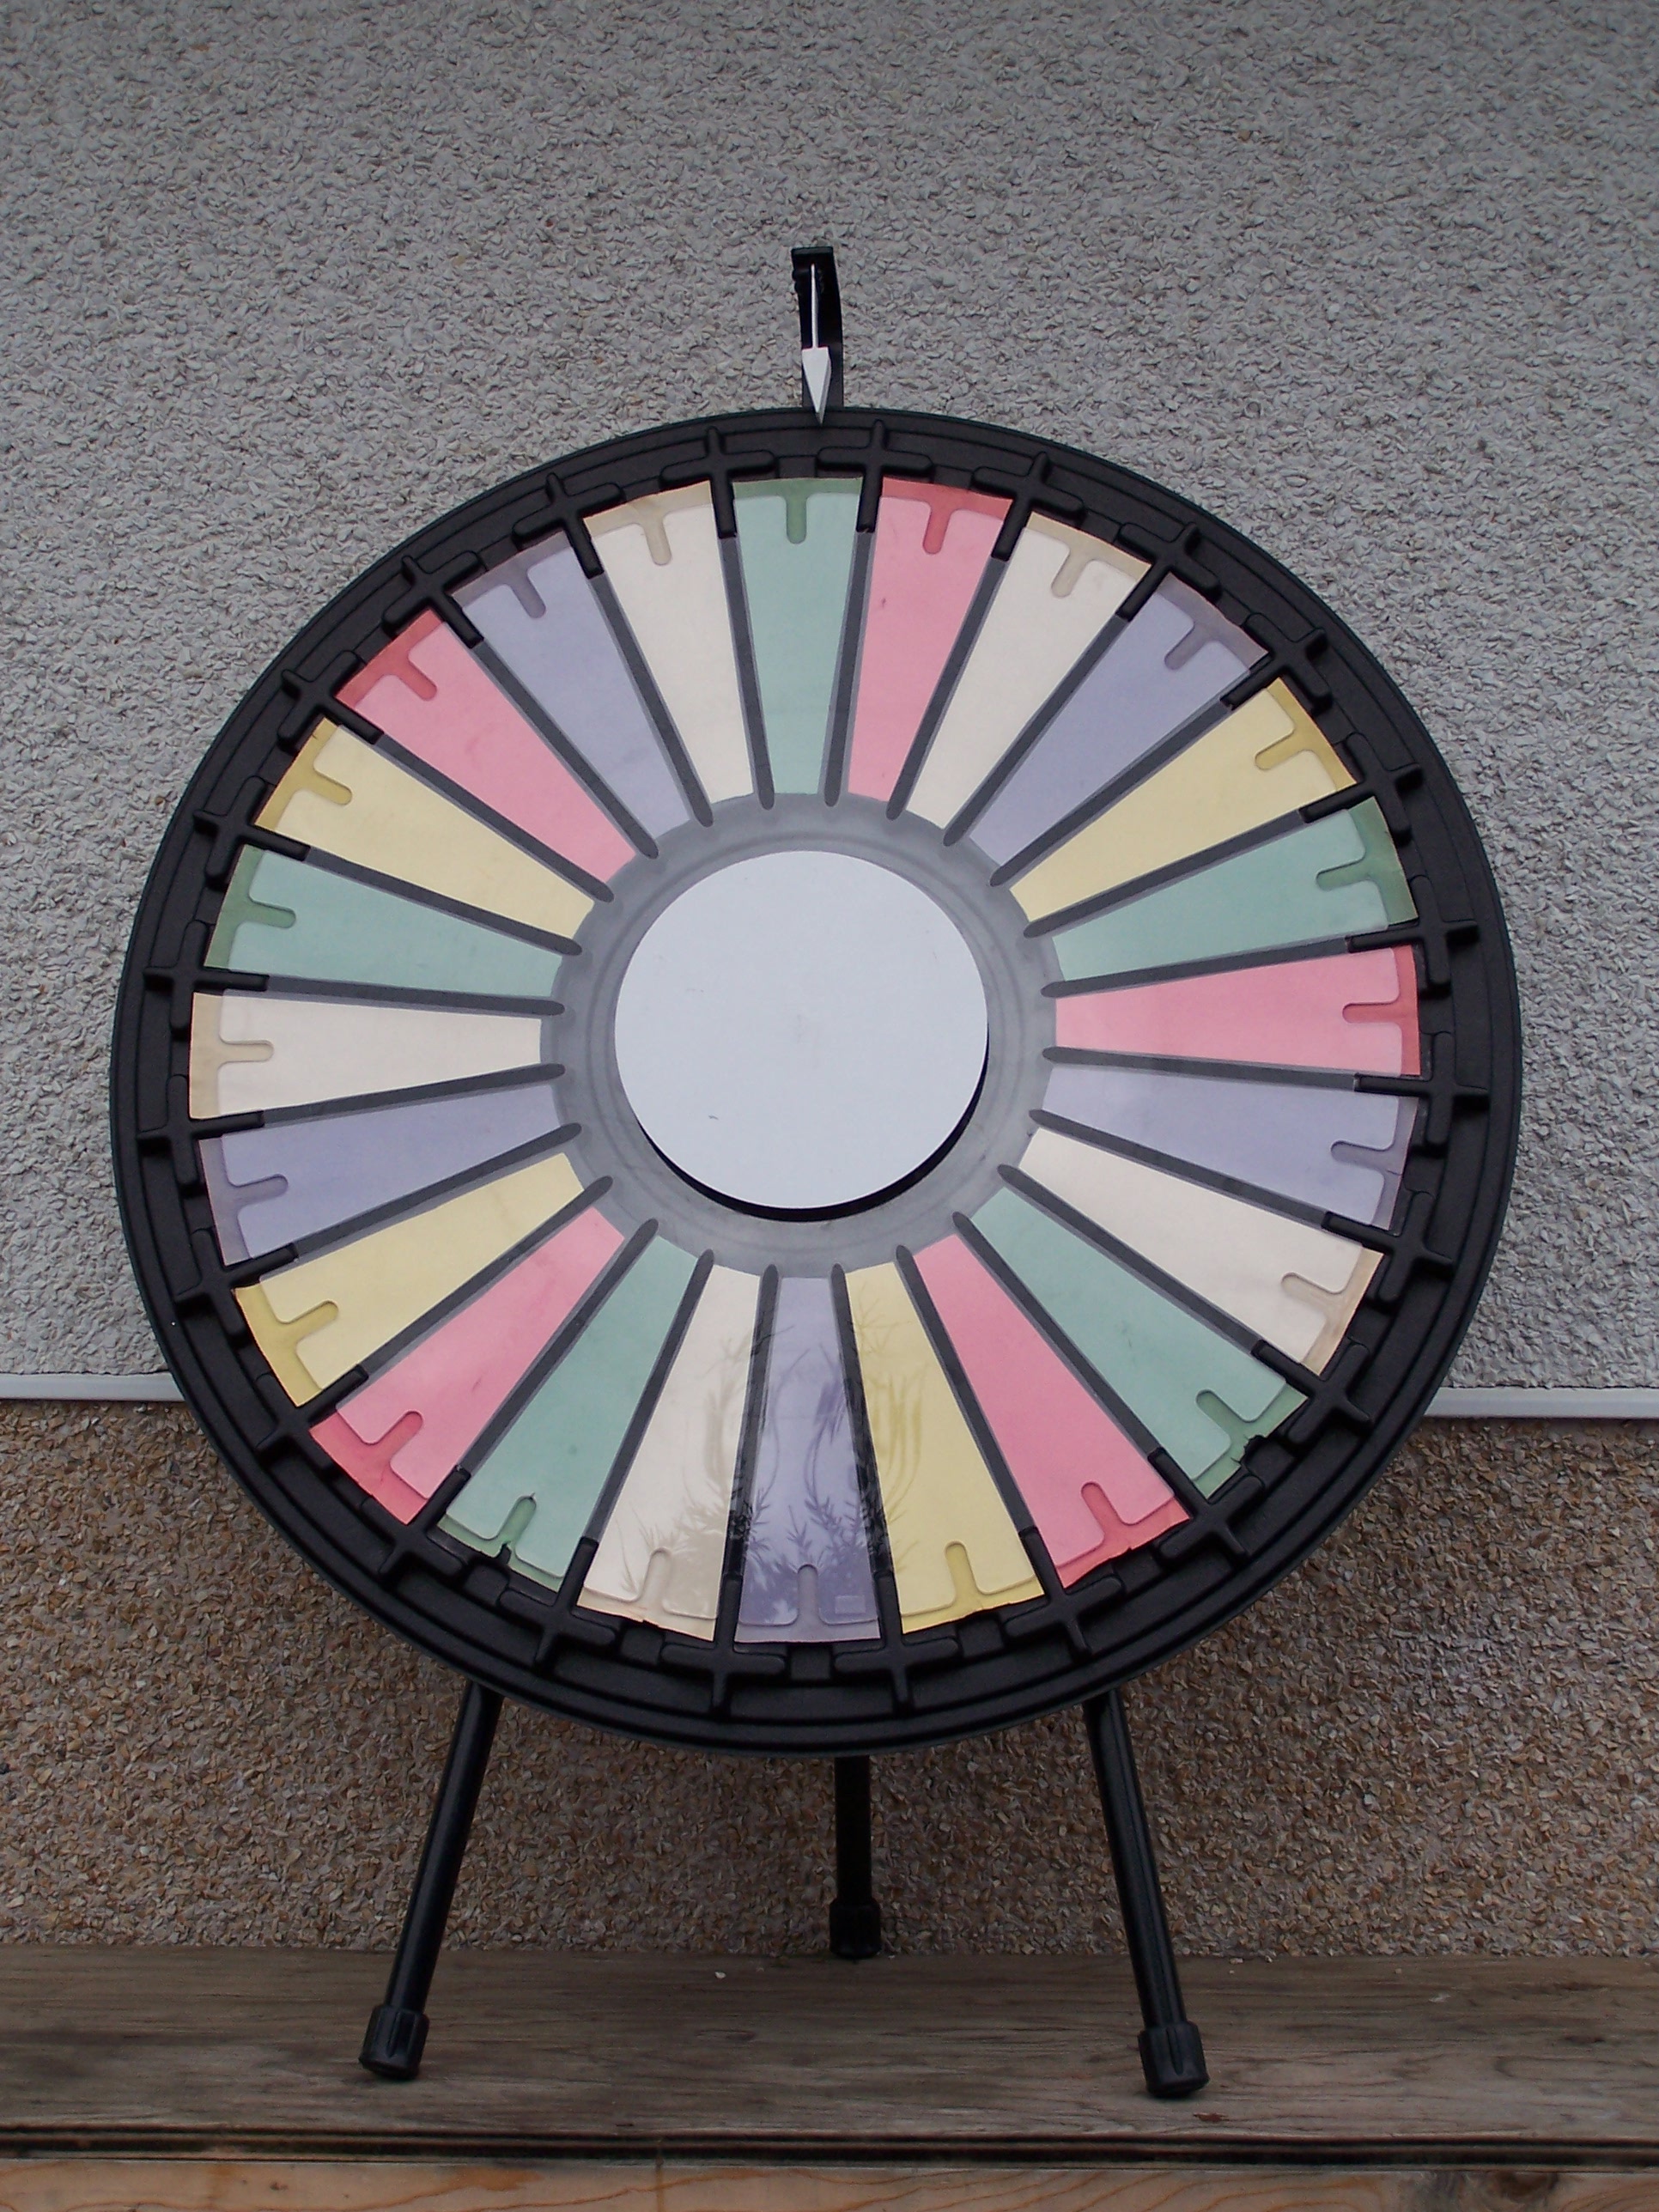 Used wheel of fortune slot machines for sale